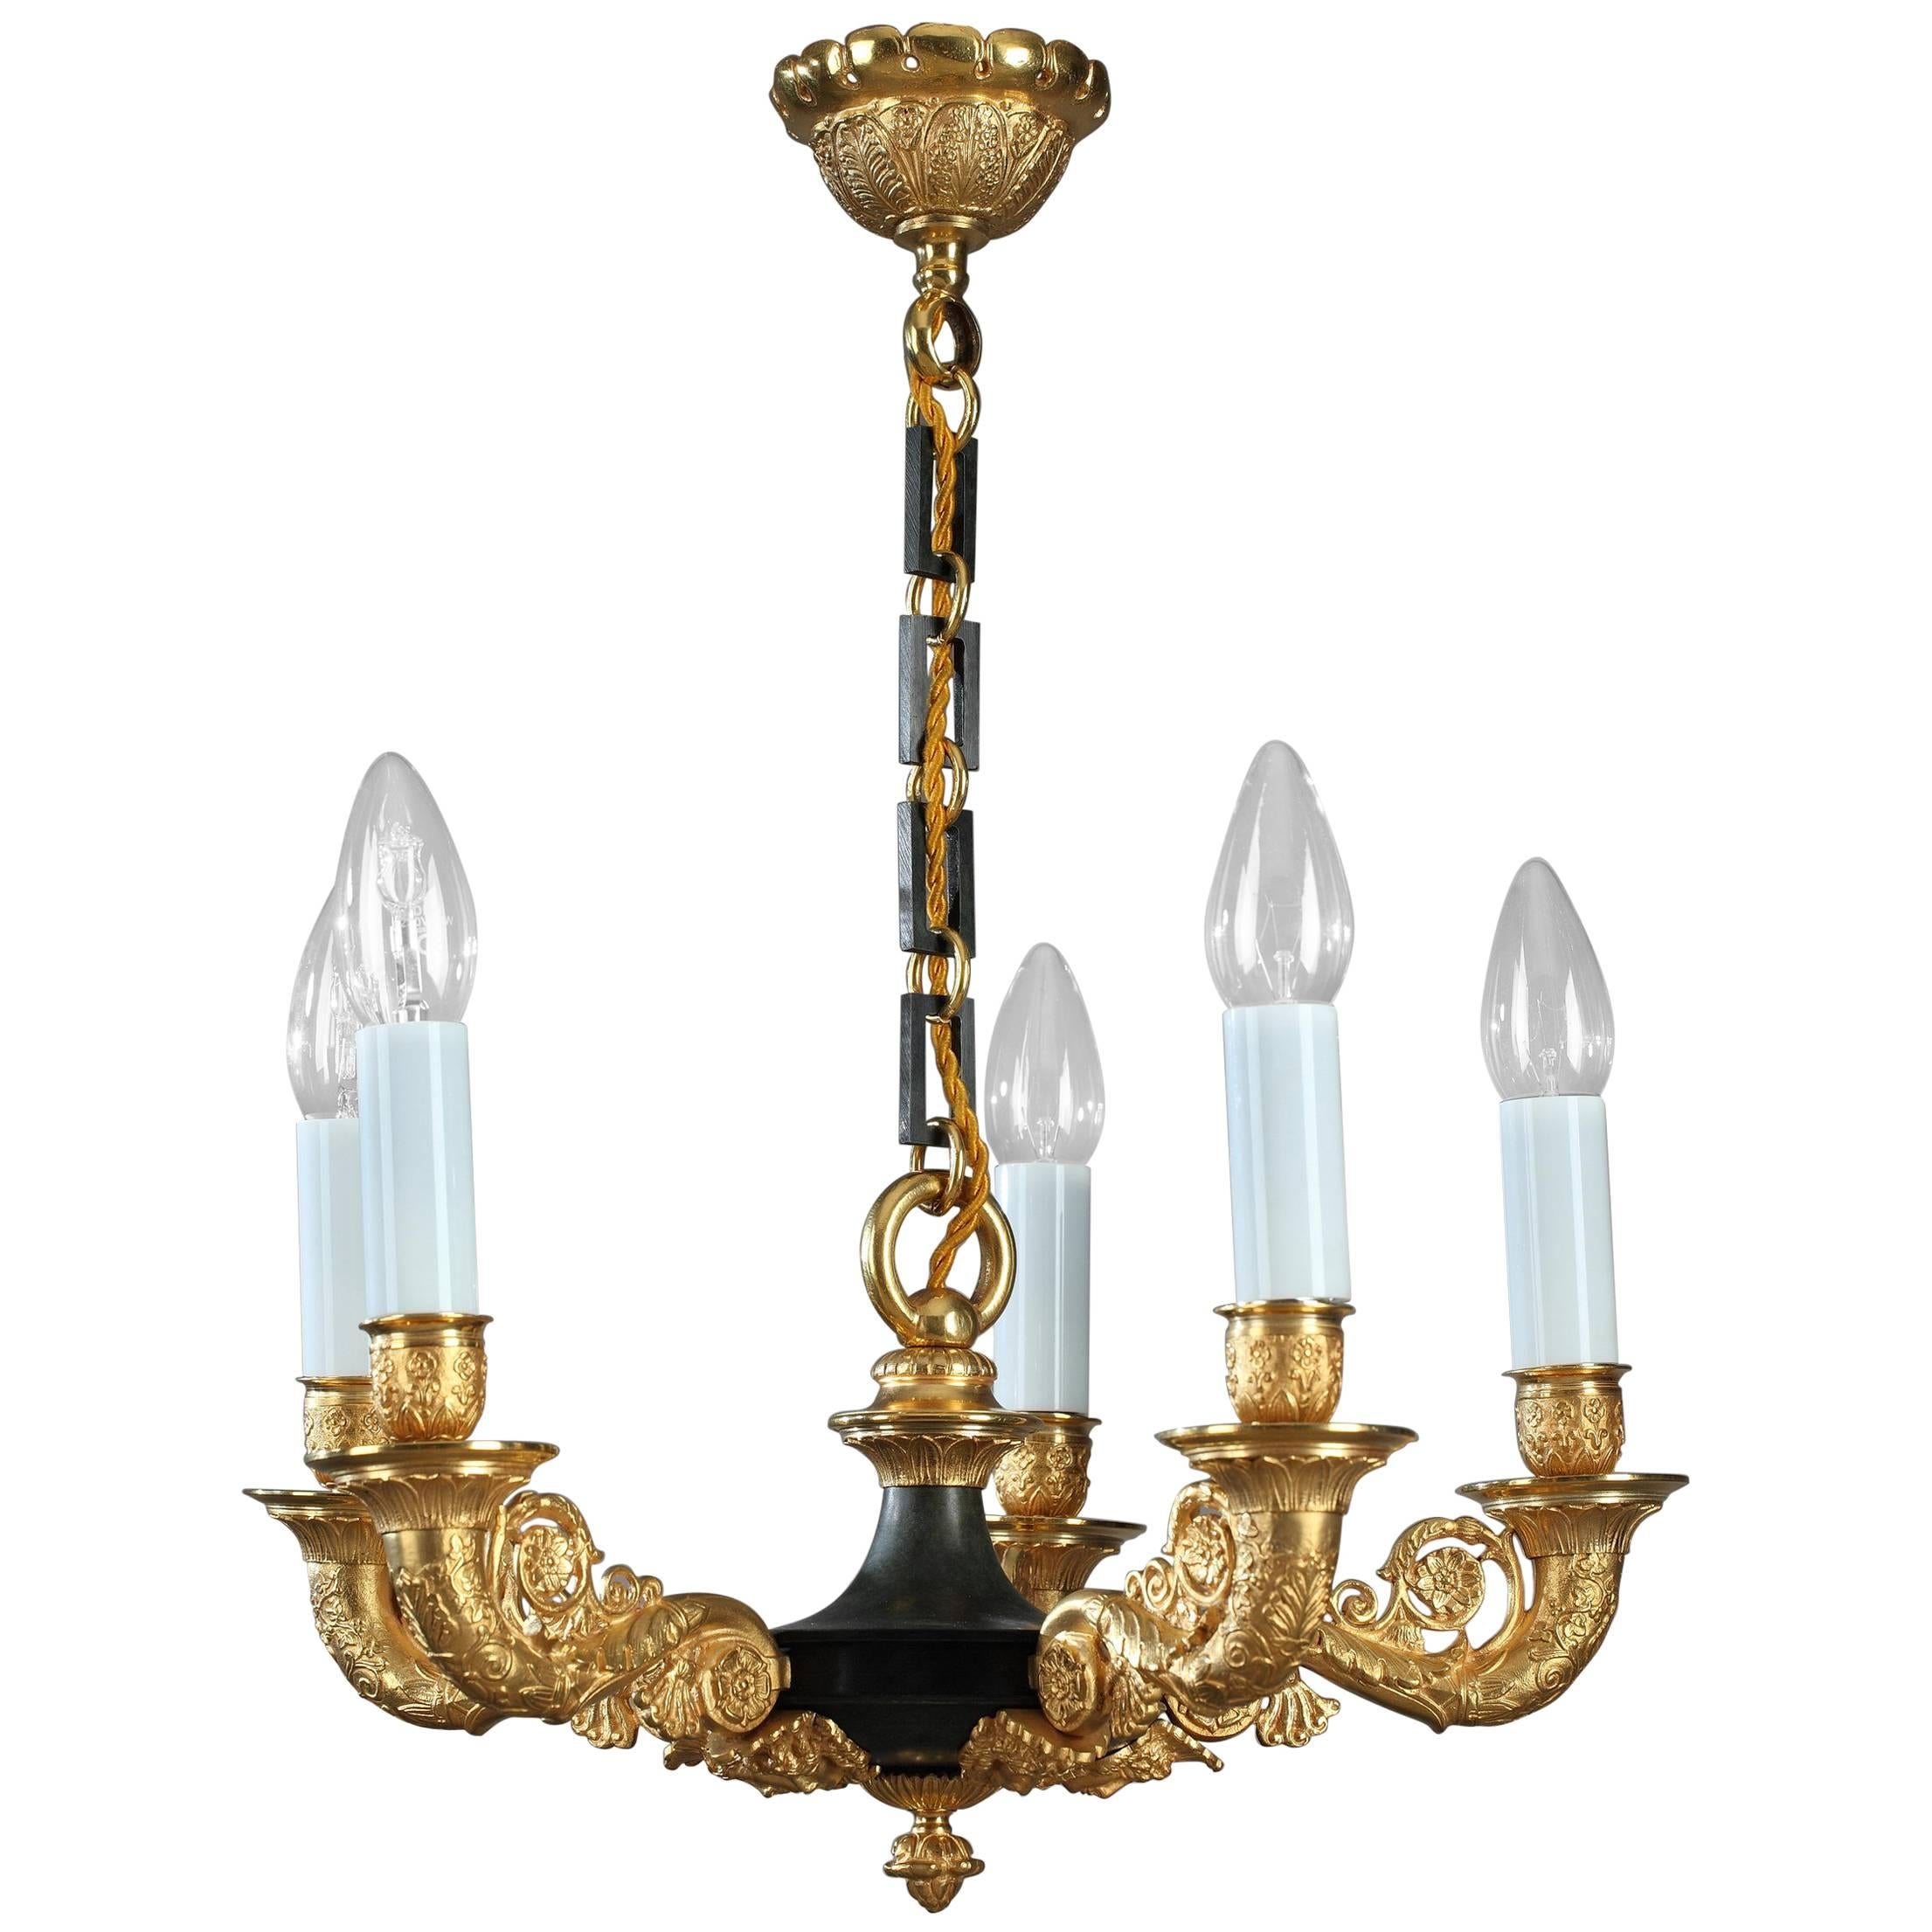 Early 19th Century Restauration Period Gilt and Patinated Bronze Chandelier